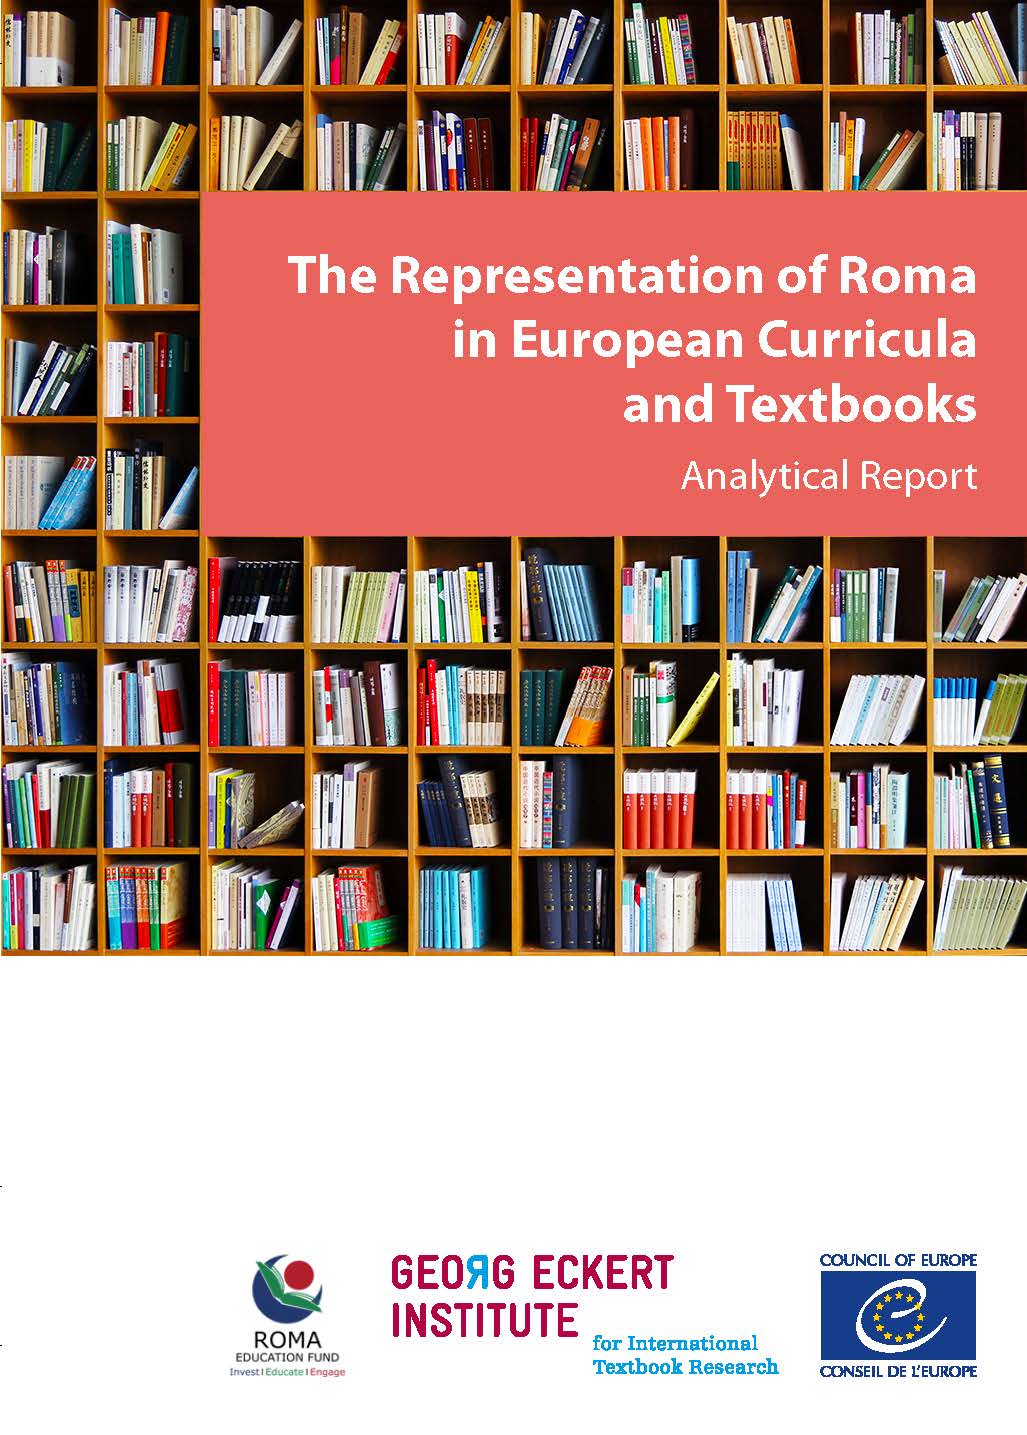 The Representation of Roma in European Curricula and Textbooks